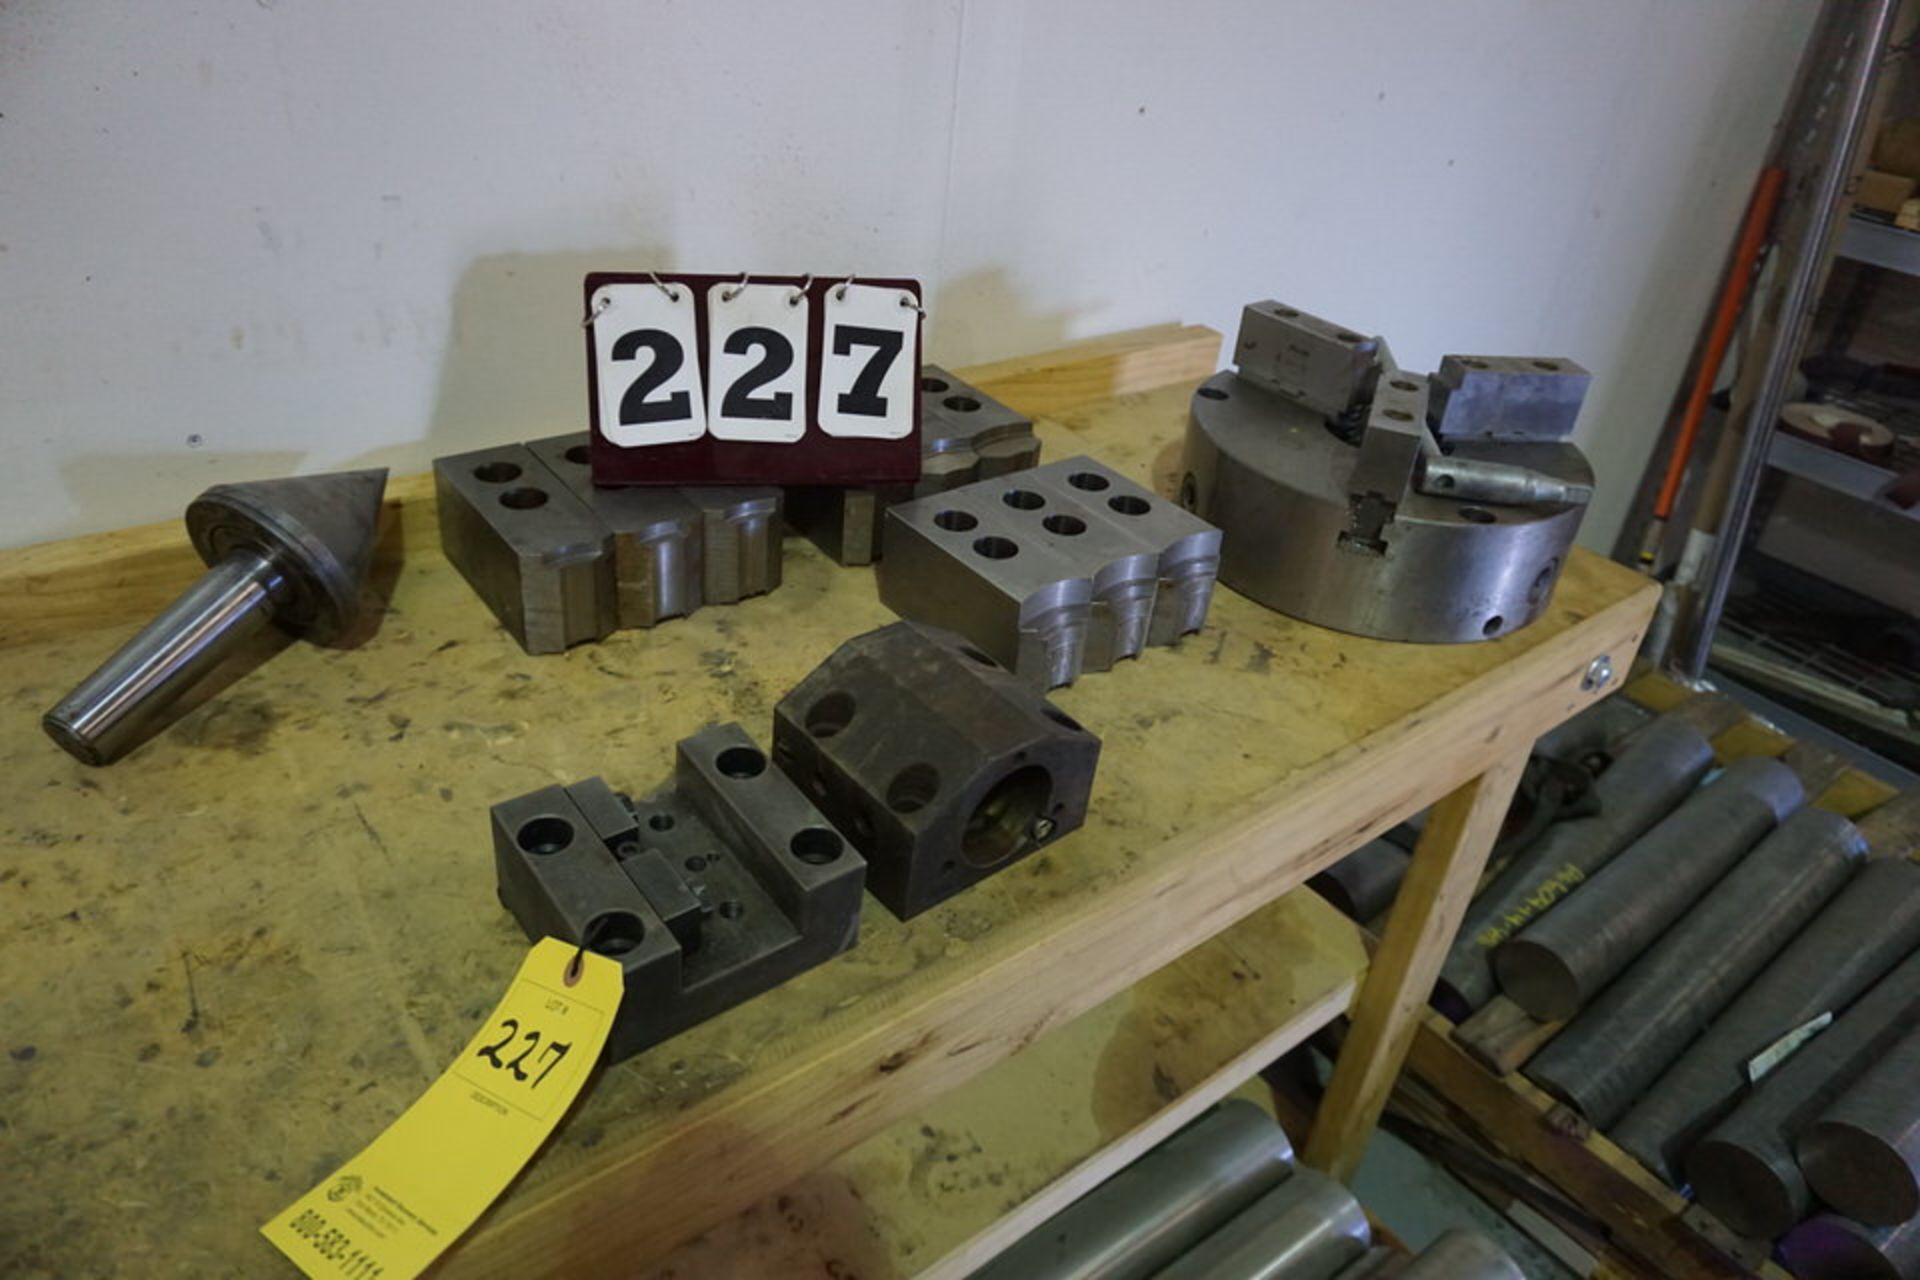 12" 3 JAW CHUCK, 3 SETS OF CHUCK JAWS, LIVE CENTER, TOOLING BLOCKS